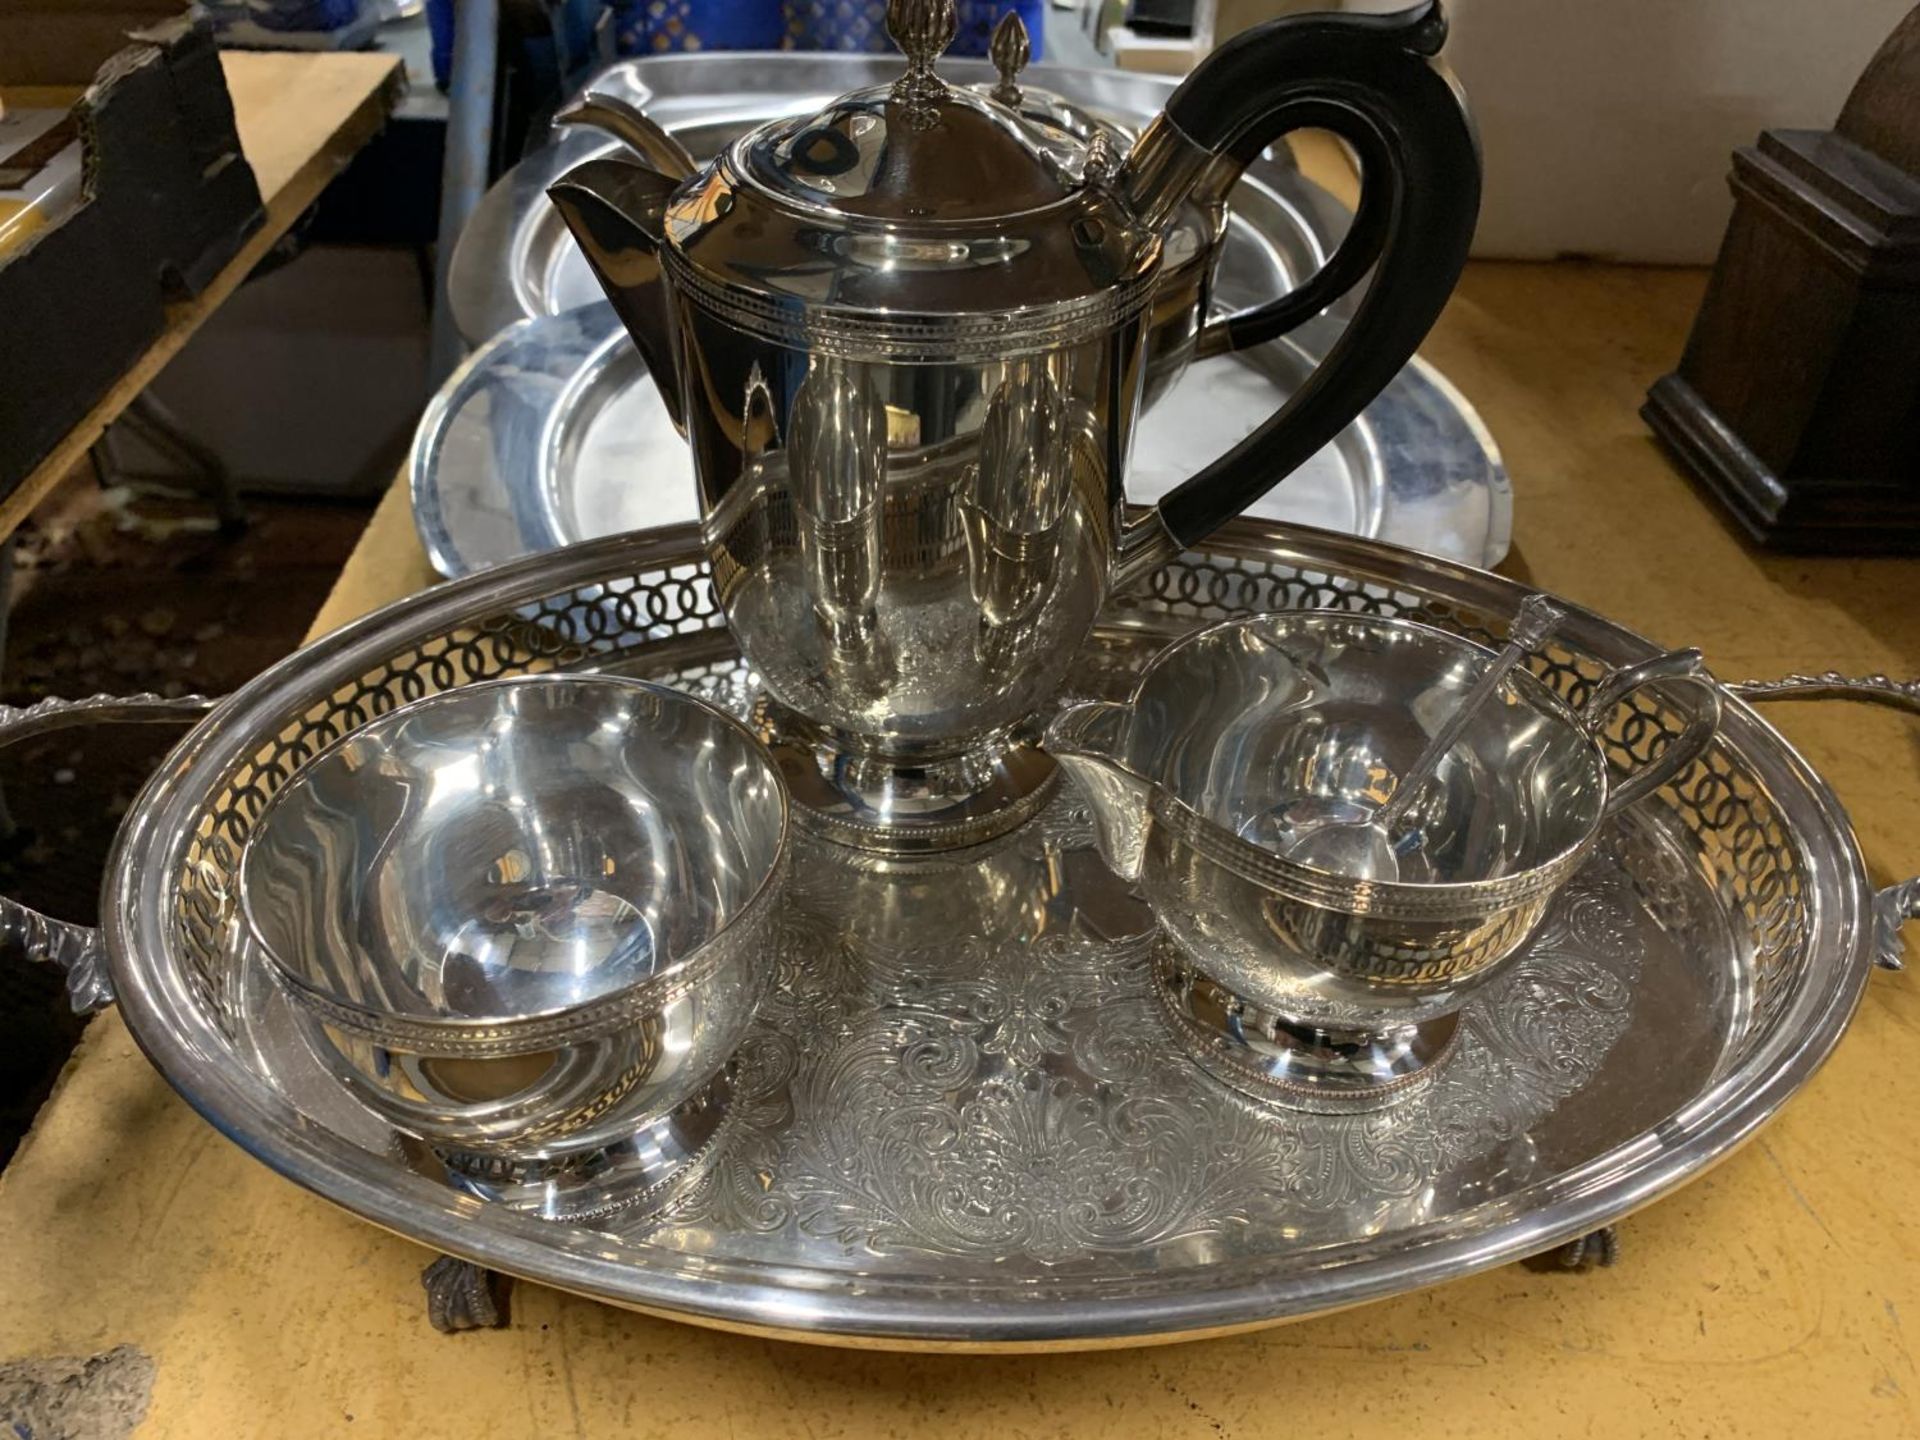 A SILVER PLATED TEA SET ON A TRAY AND THREE FURTHER STAINLESS STEEL TRAYS - Image 4 of 5